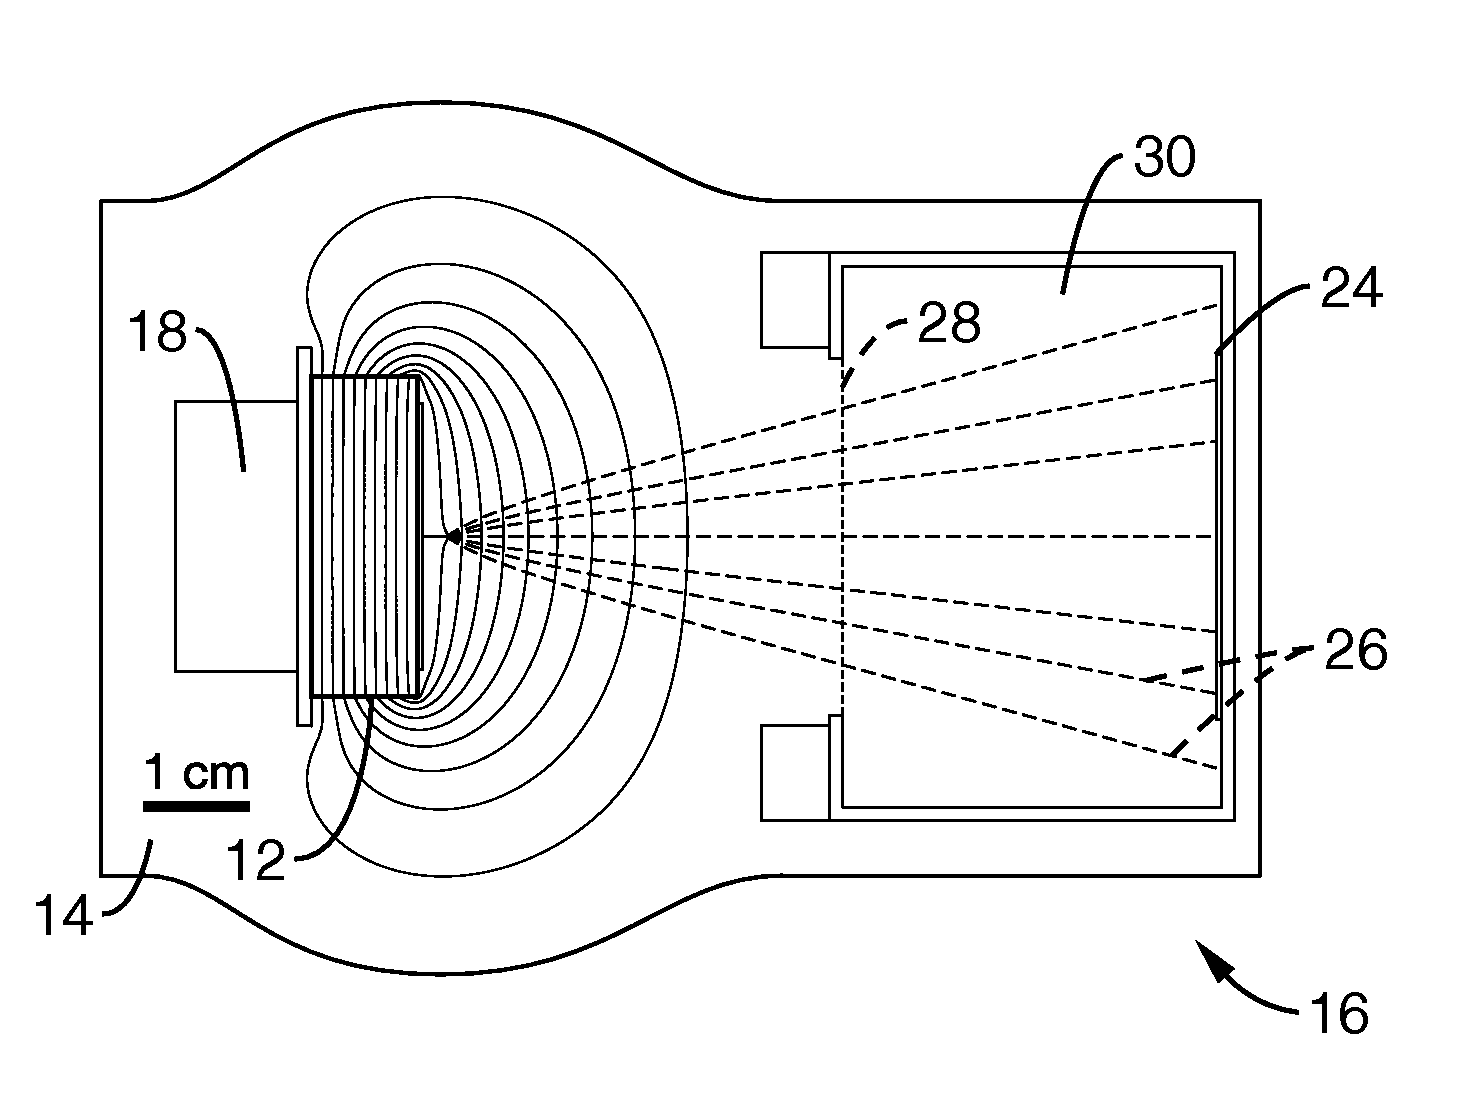 Method and apparatus for generating nuclear fusion using crystalline materials